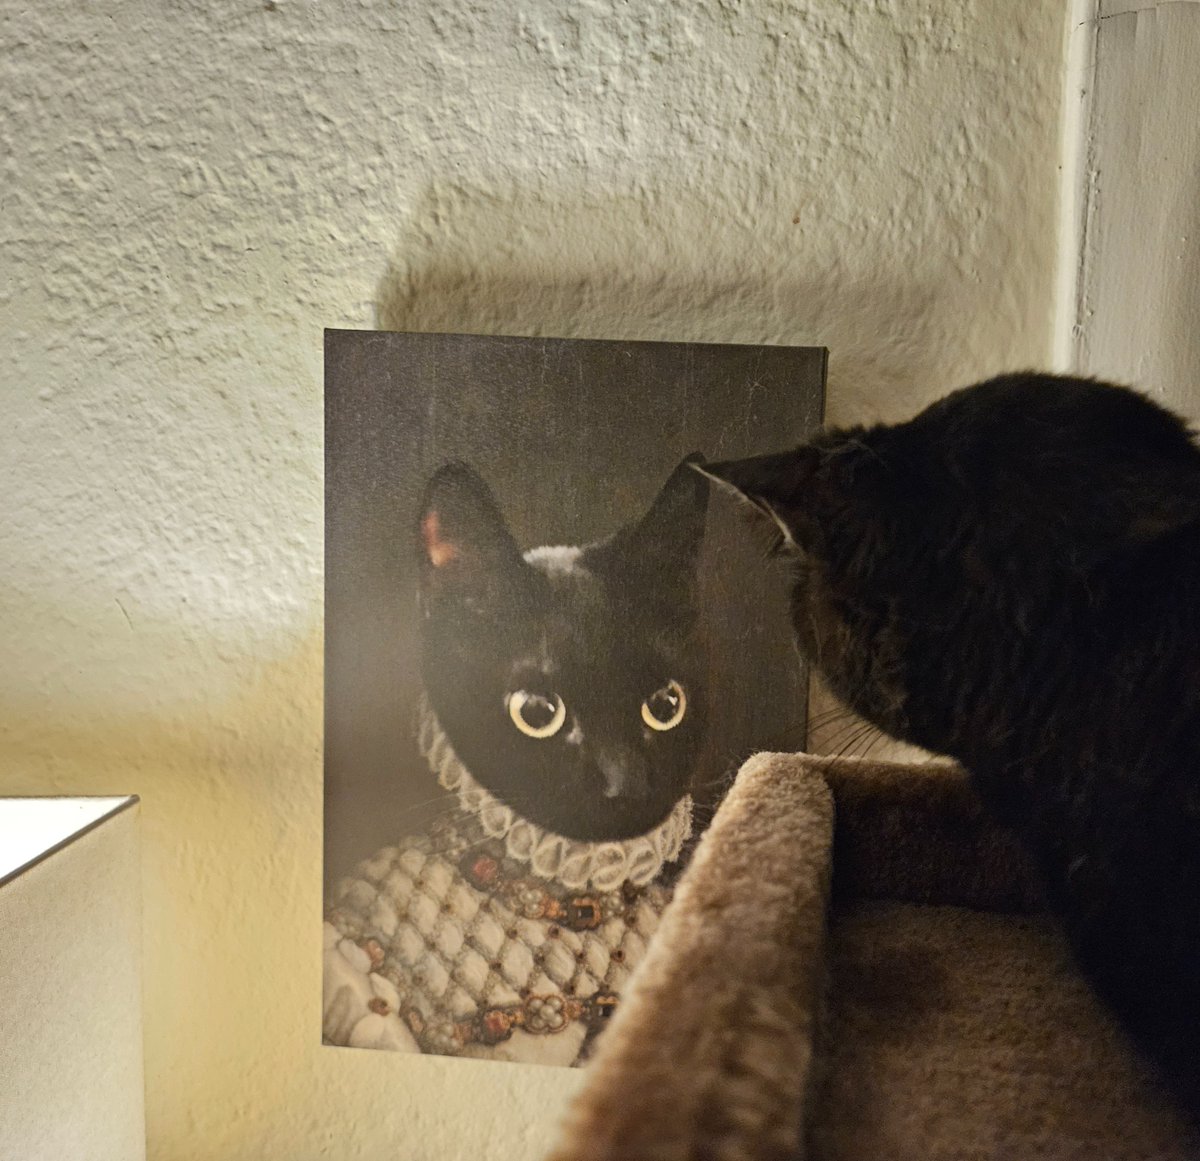 My cat's favorite spot is where she can just stare at her own portrait all day.